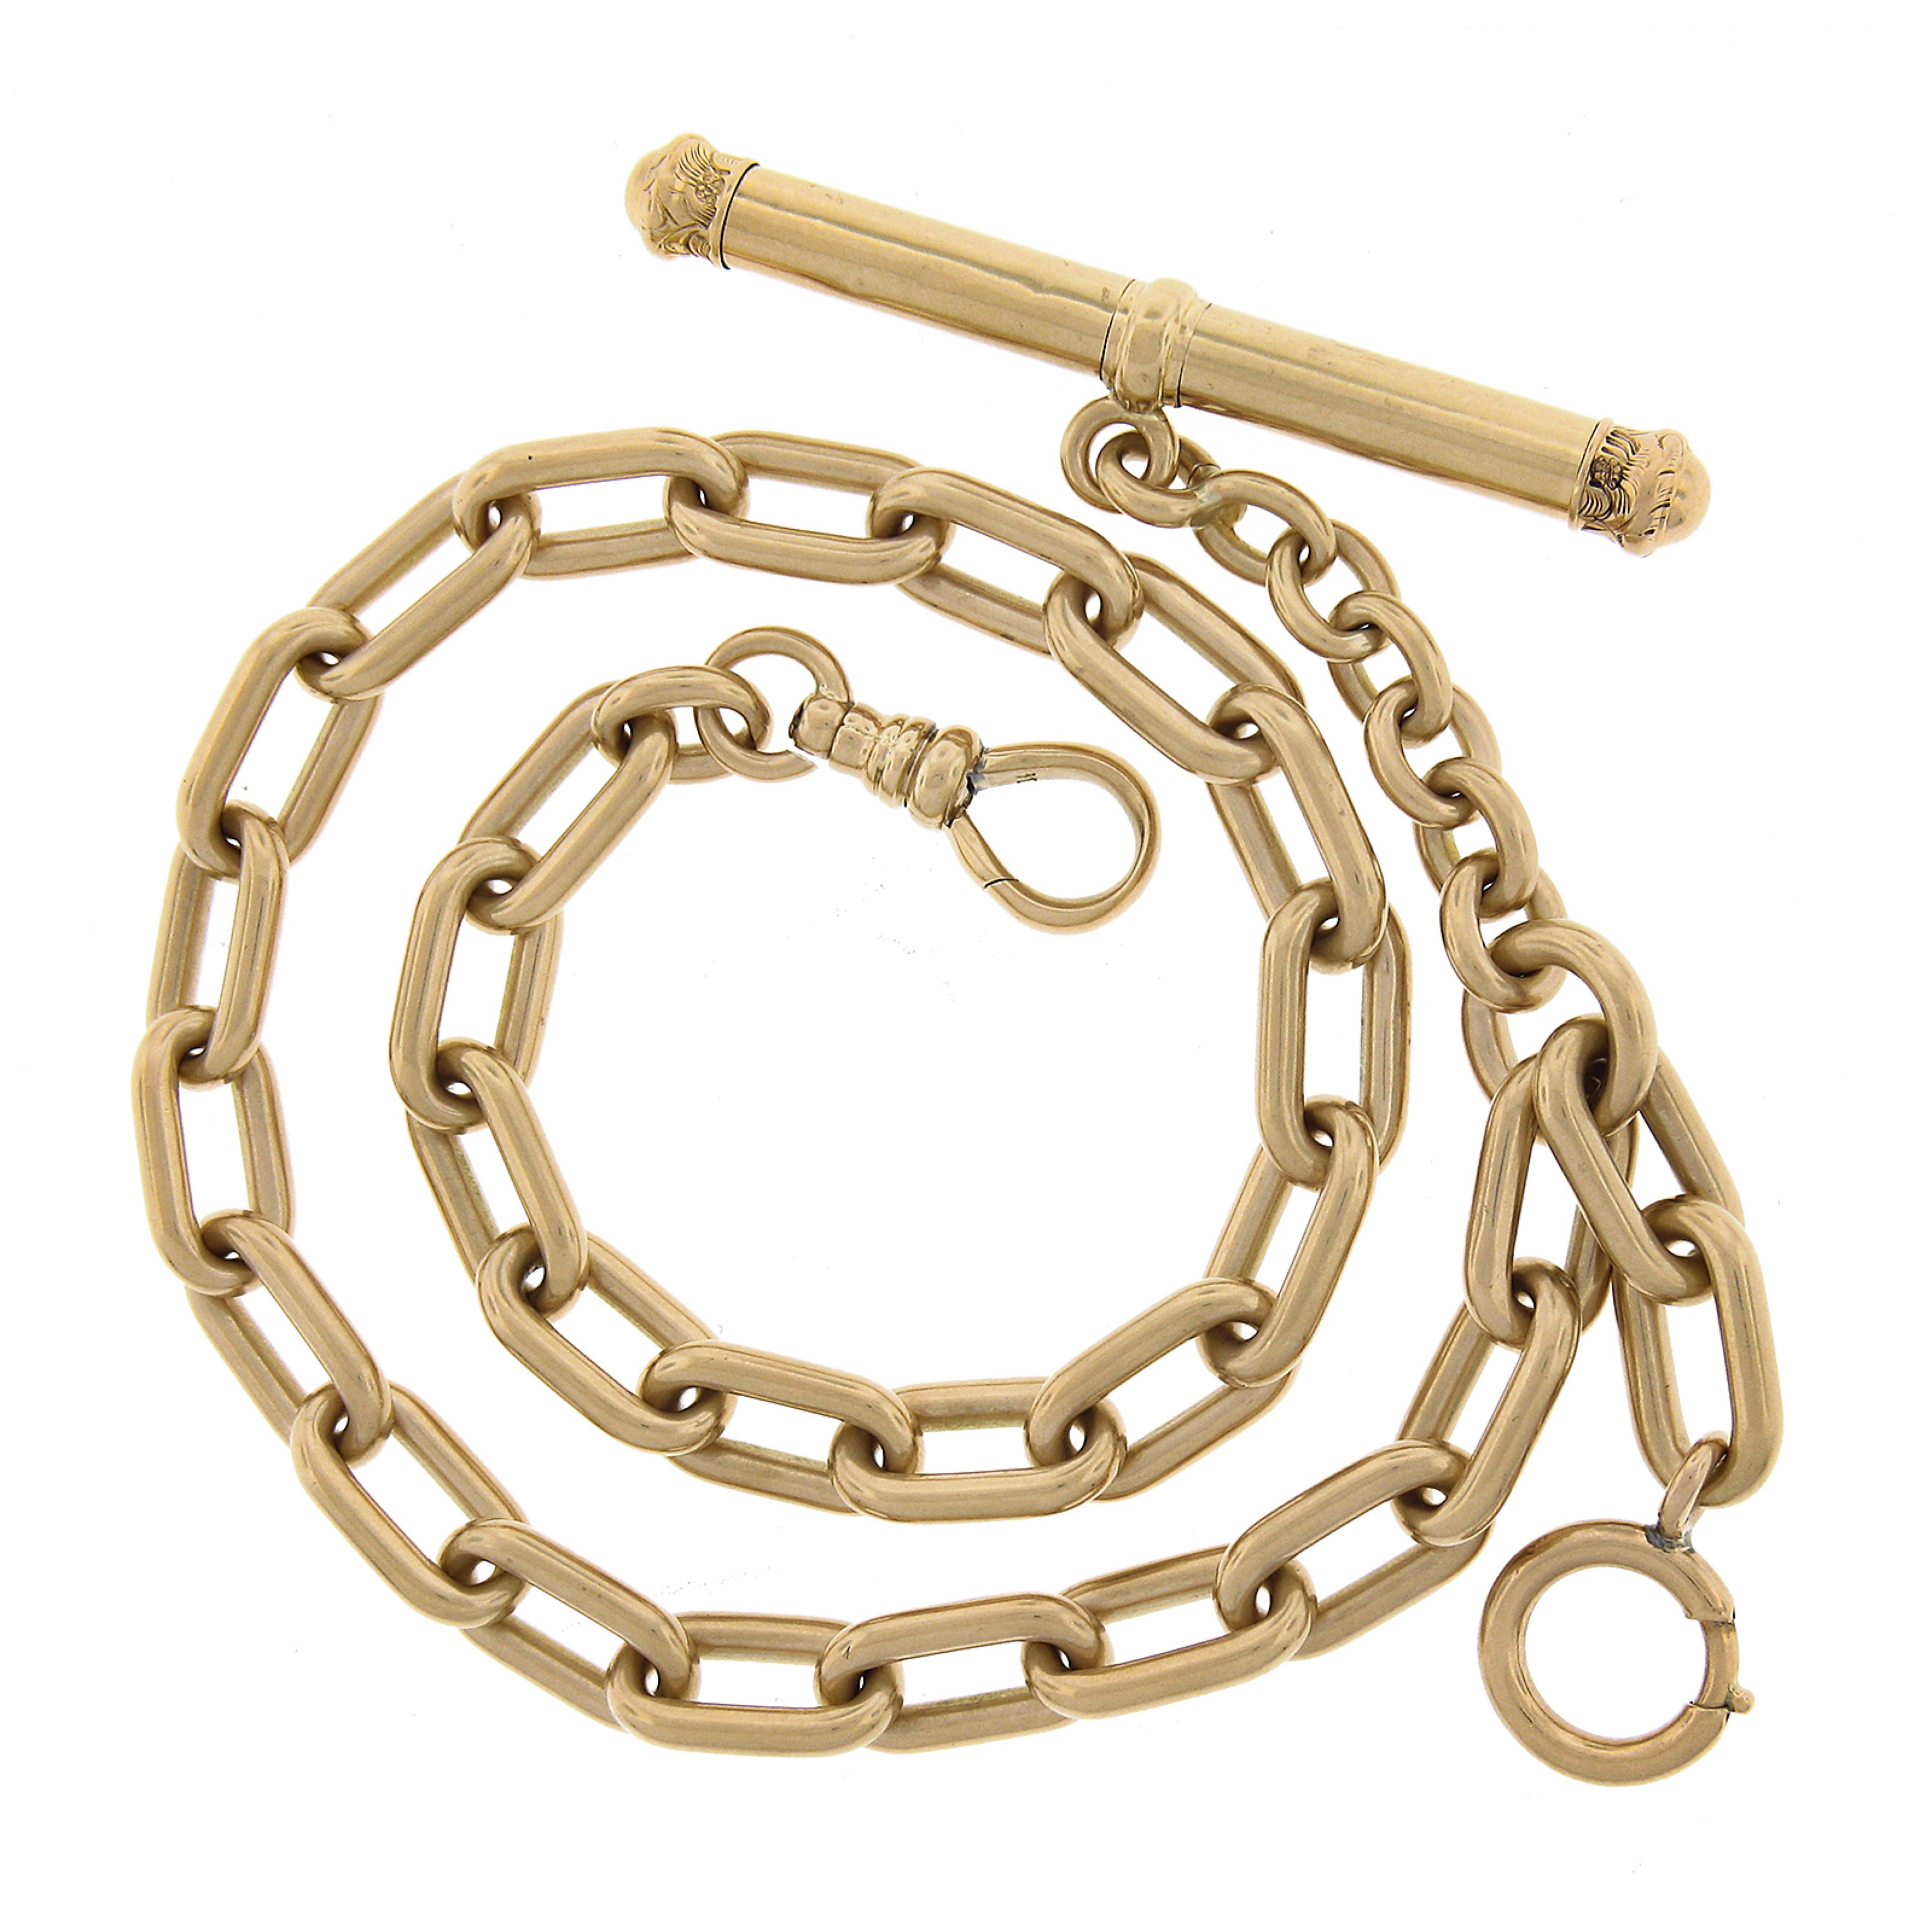 This very unique and solidly made, antique heavy duty cable link pocket watch chain was crafted in solid 14k yellow gold during the Victorian period. It measures 13.75 inches long and features a 2 inch extension chain that ends with a wide T-bar